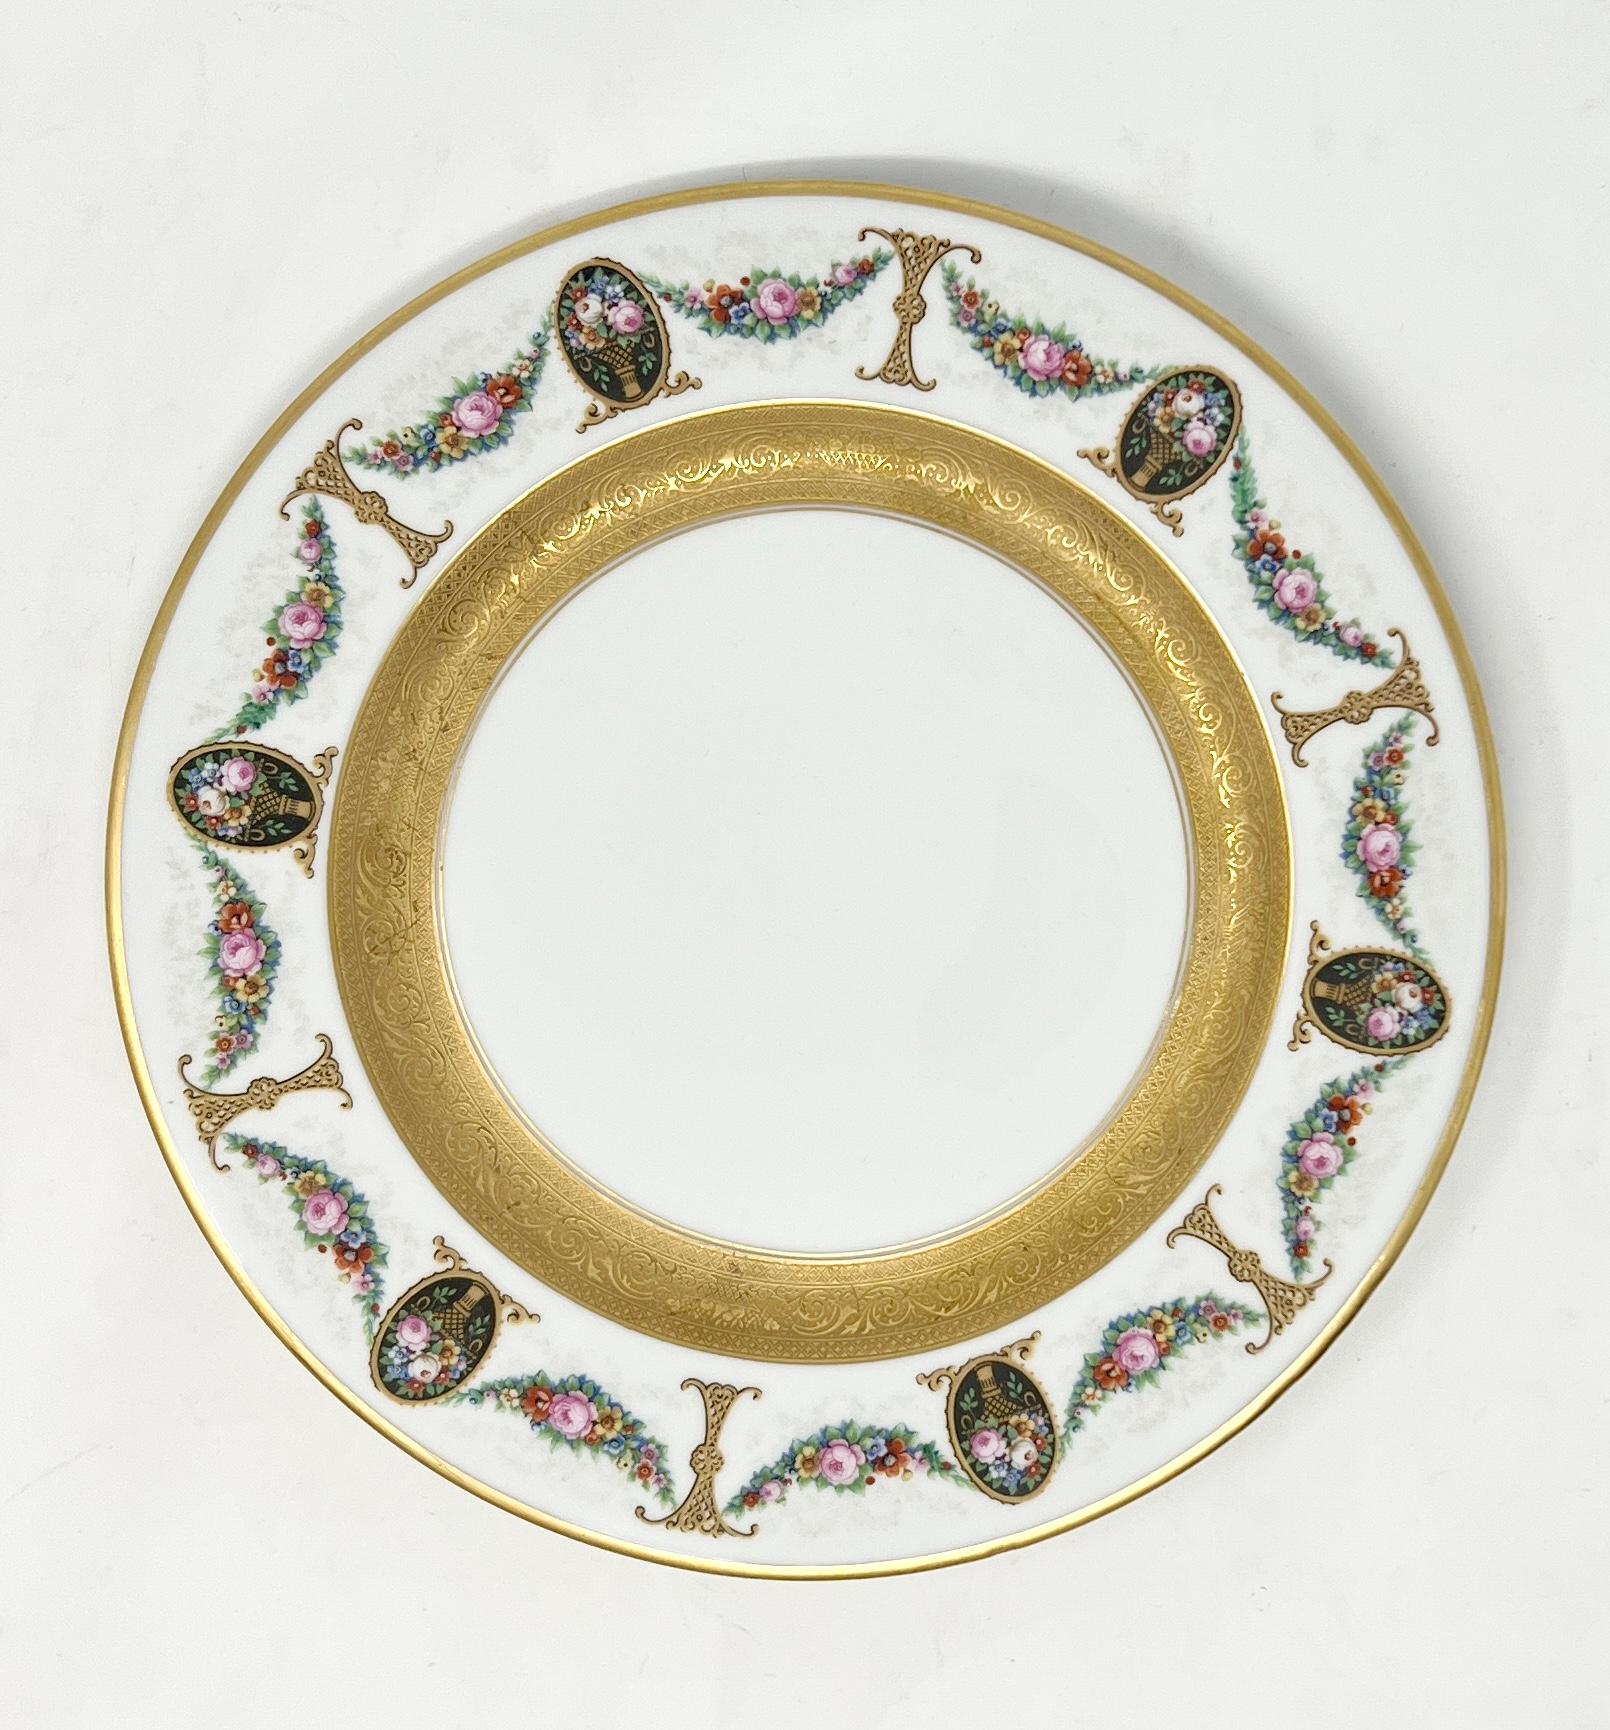 Set of 24 Antique Royal Bavarian Porcelain Dinner Plates Circa 1910-1915.
Pink Florals and Garland on a Cream Background with Hand-Painted Gold-Leaf Details.